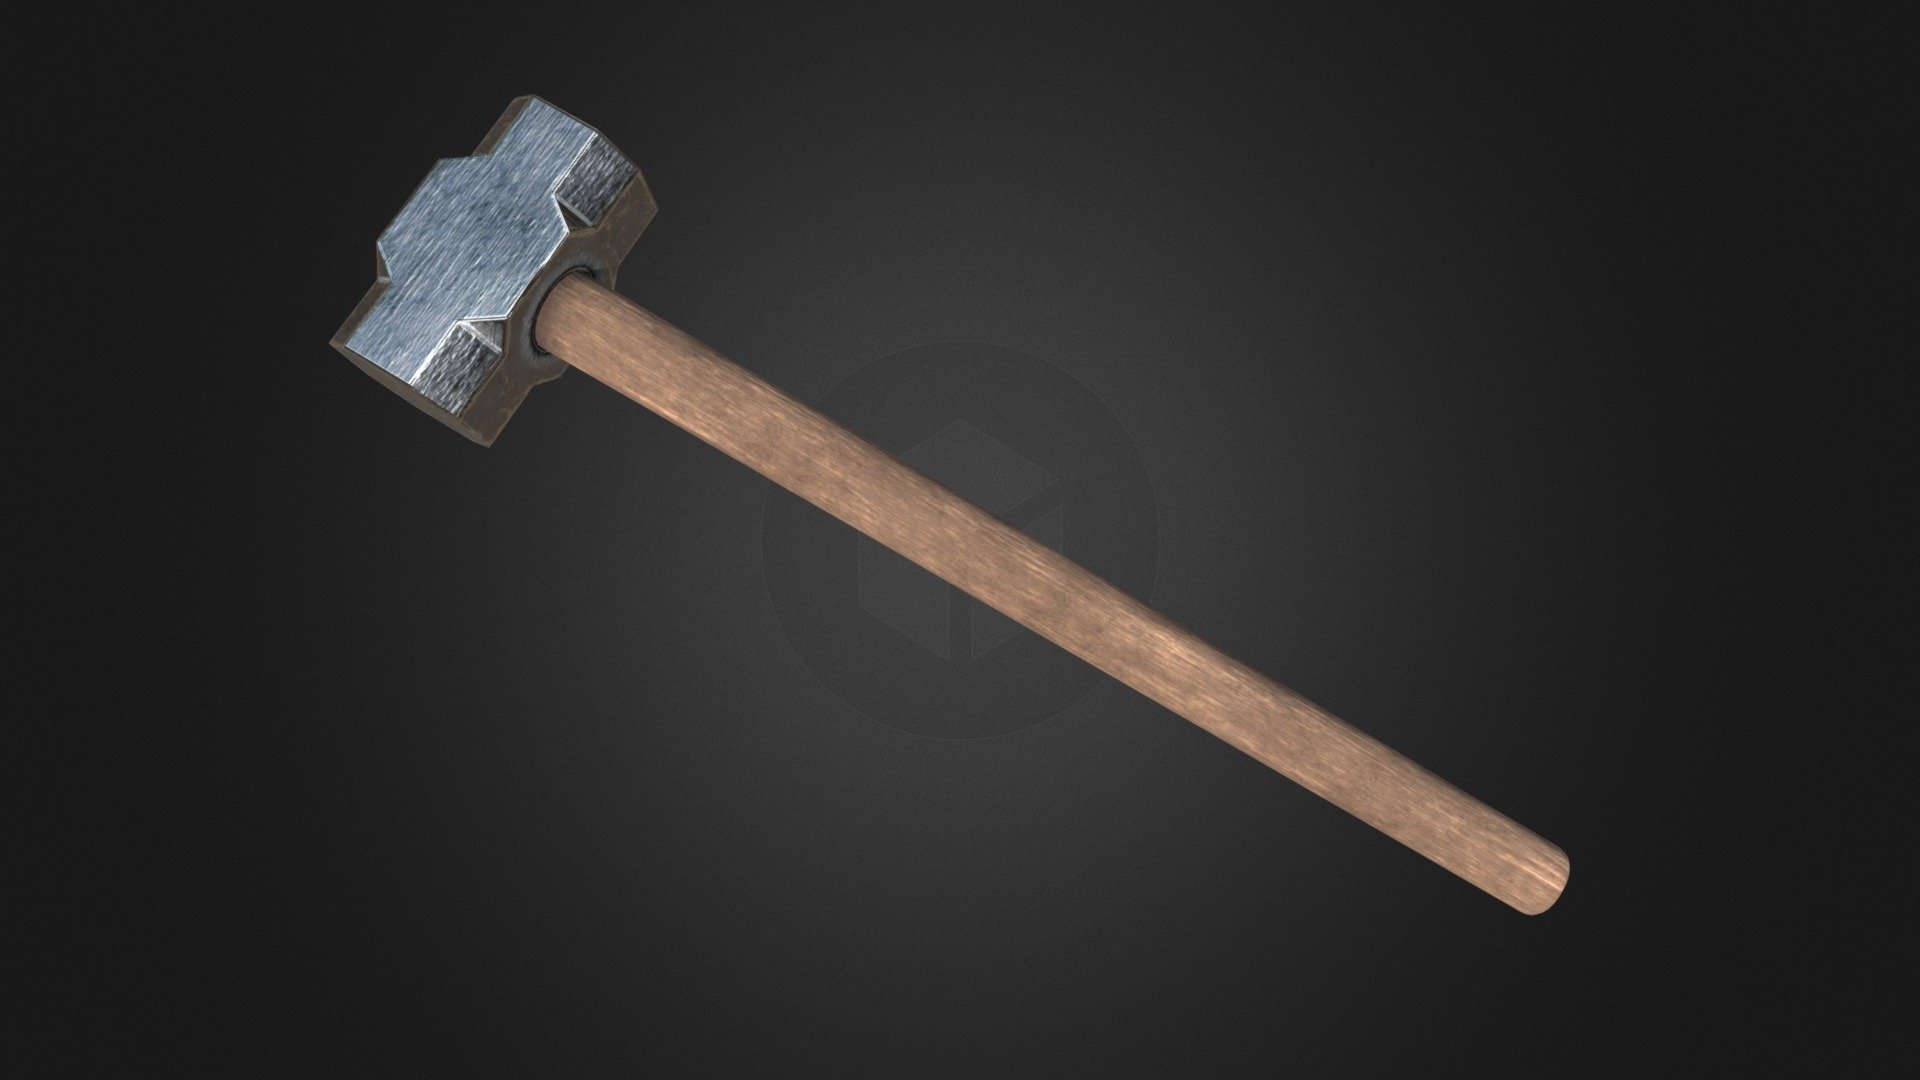 Made this to test out substance painter - Sledge Hammer - 3D model by HBradnam 3d model